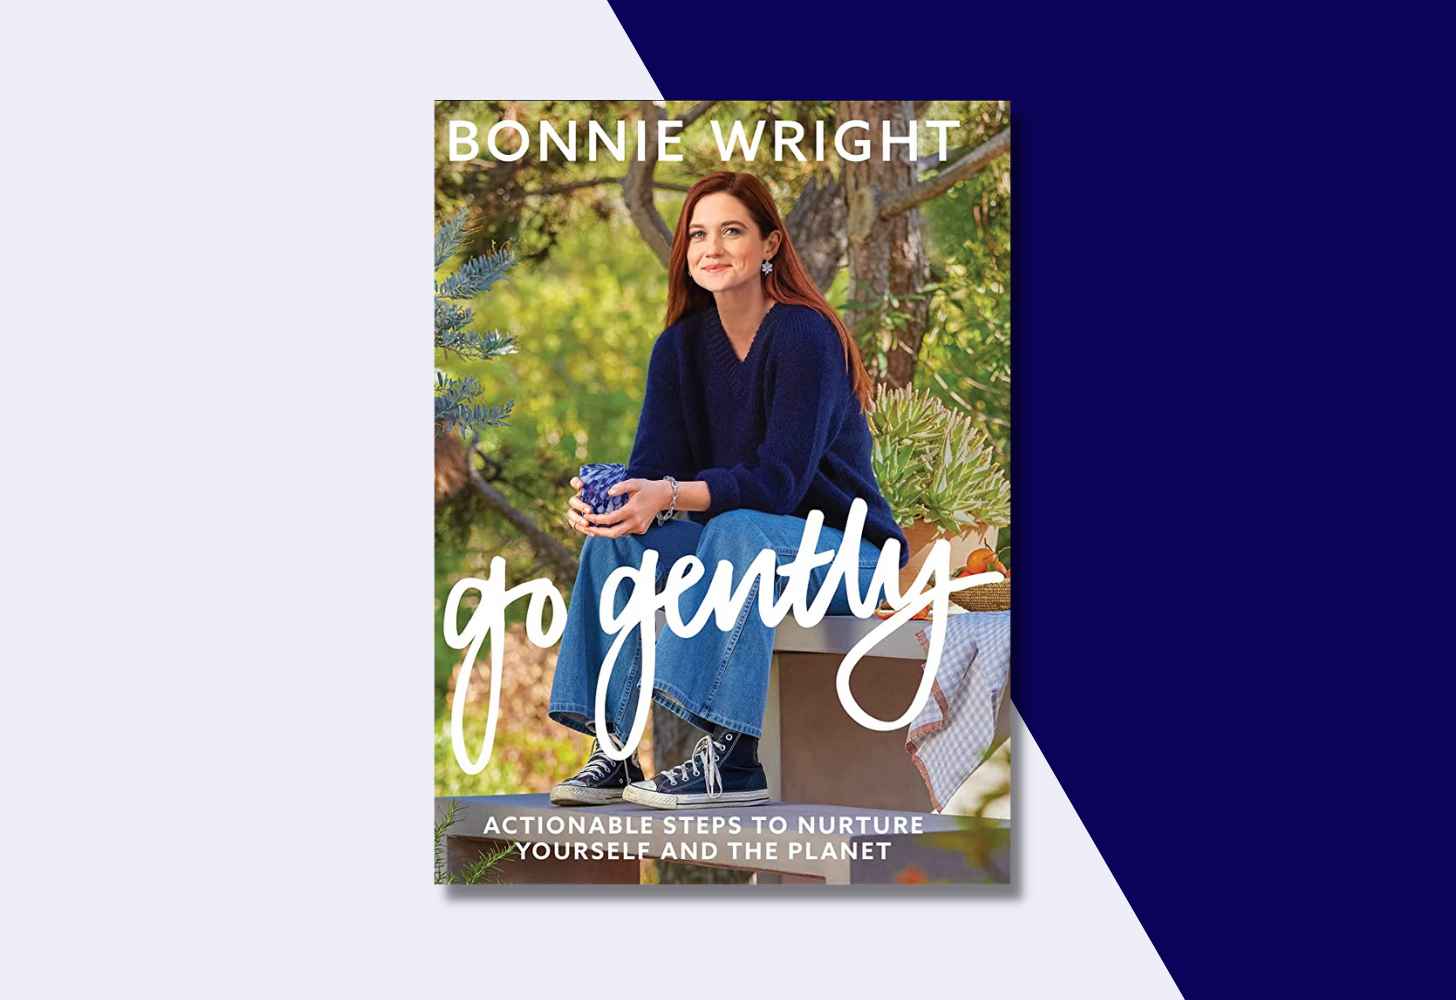 The Cover Of “Go Gently: Actionable Steps to Nurture Yourself and the Planet” by Bonnie Wright